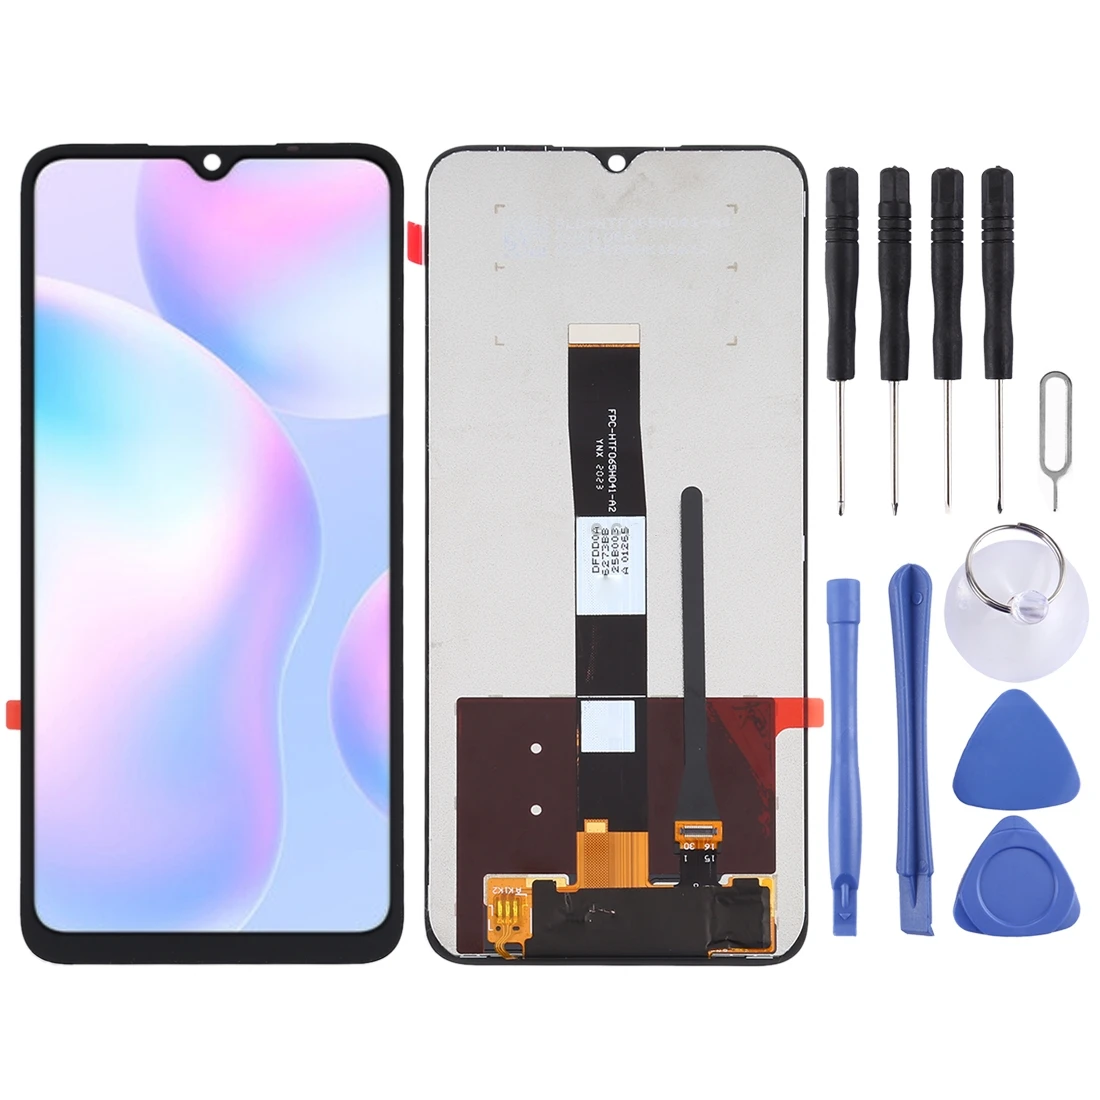 

Original For Xiaomi Redmi 9 9A 9C LCD Display Touch Screen Digitizer For Redmi 9 M2004J19AG M2004J19C Assembly Replacement Parts